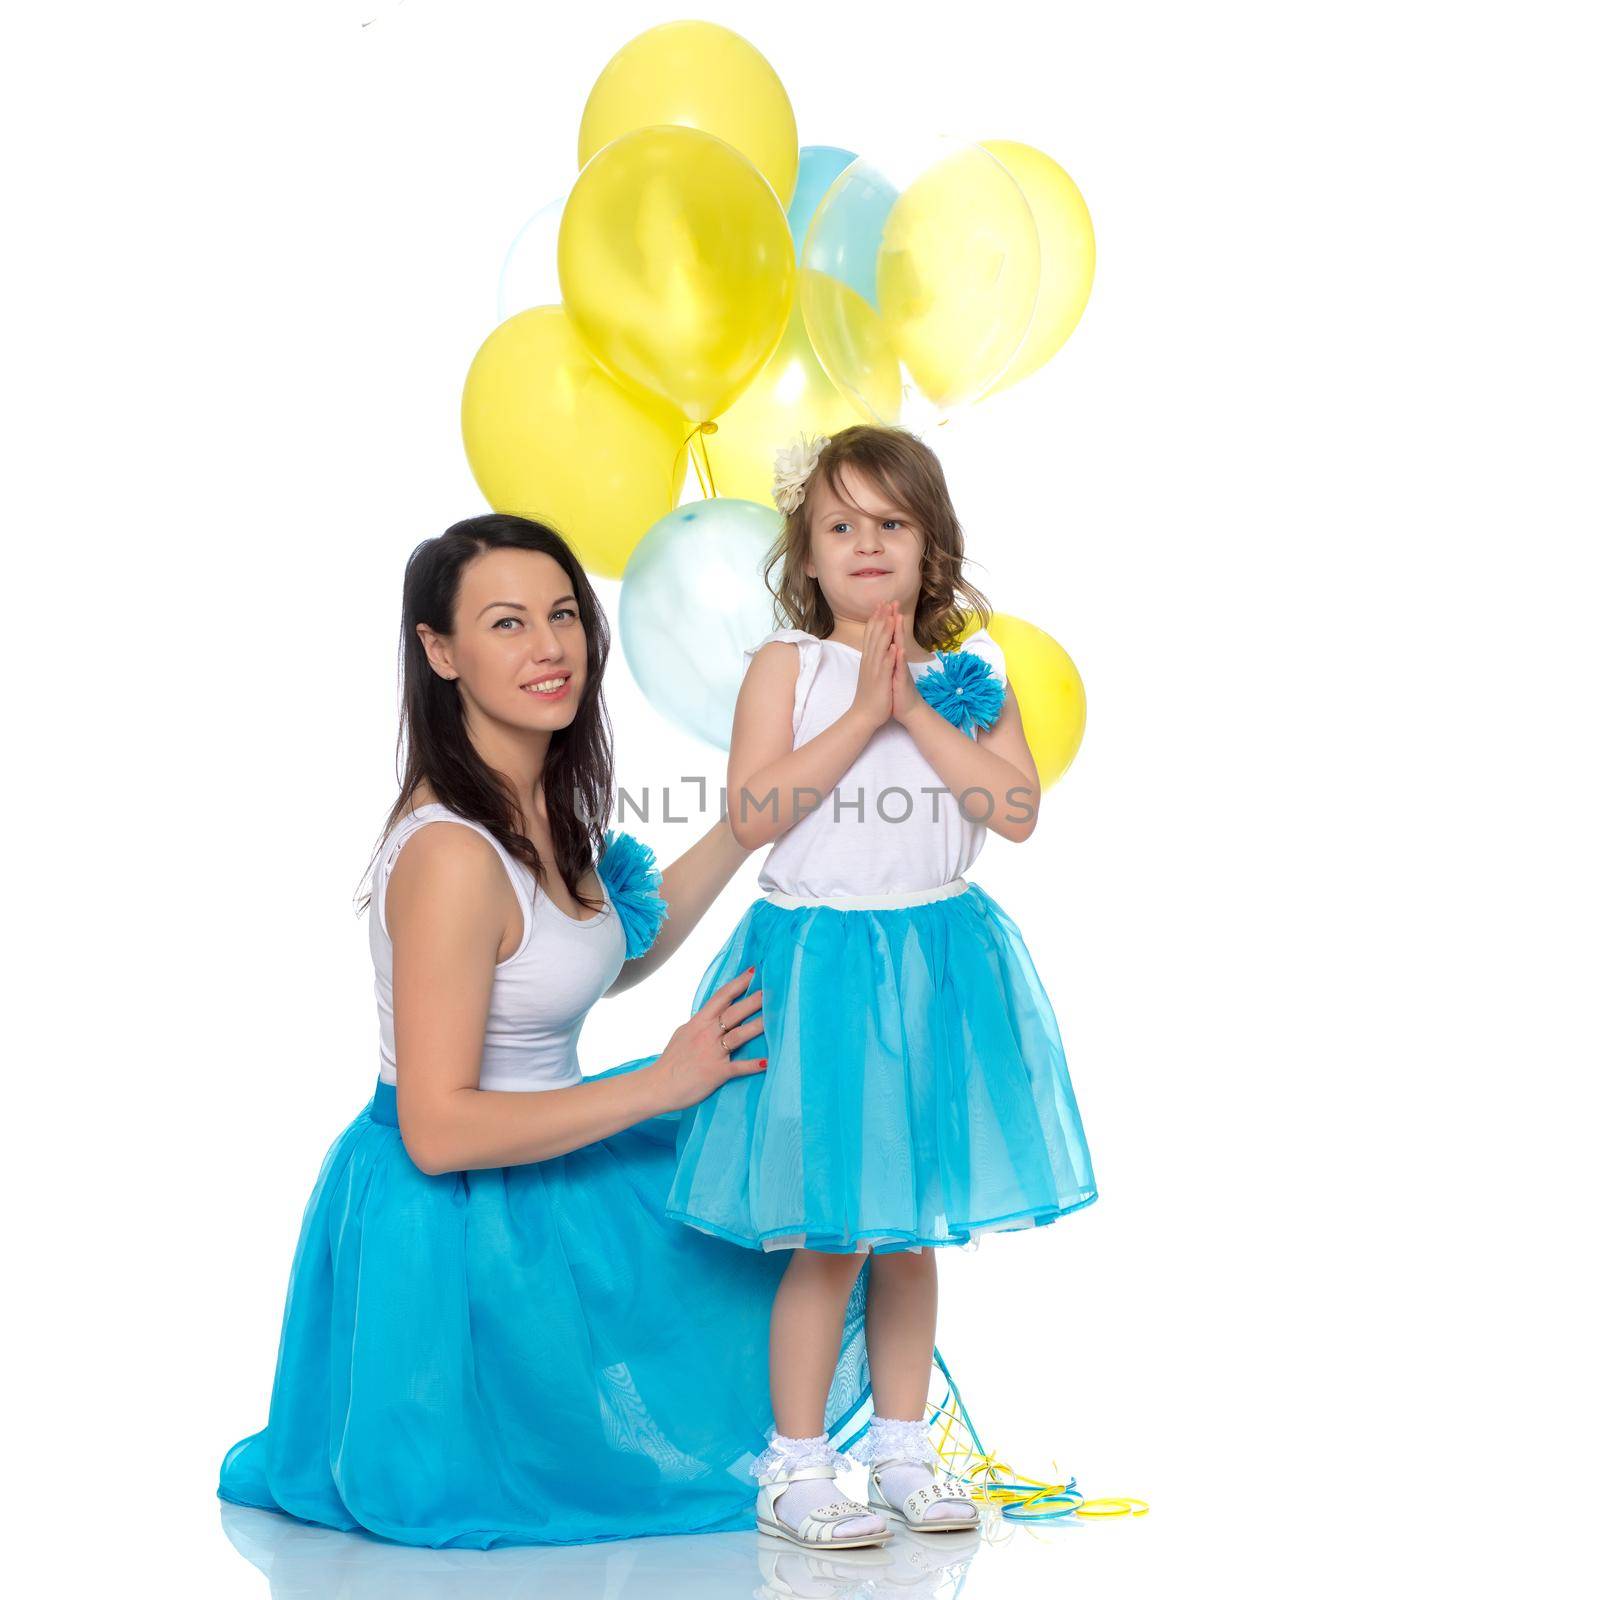 Mom and daughter with colorful balloons. by kolesnikov_studio